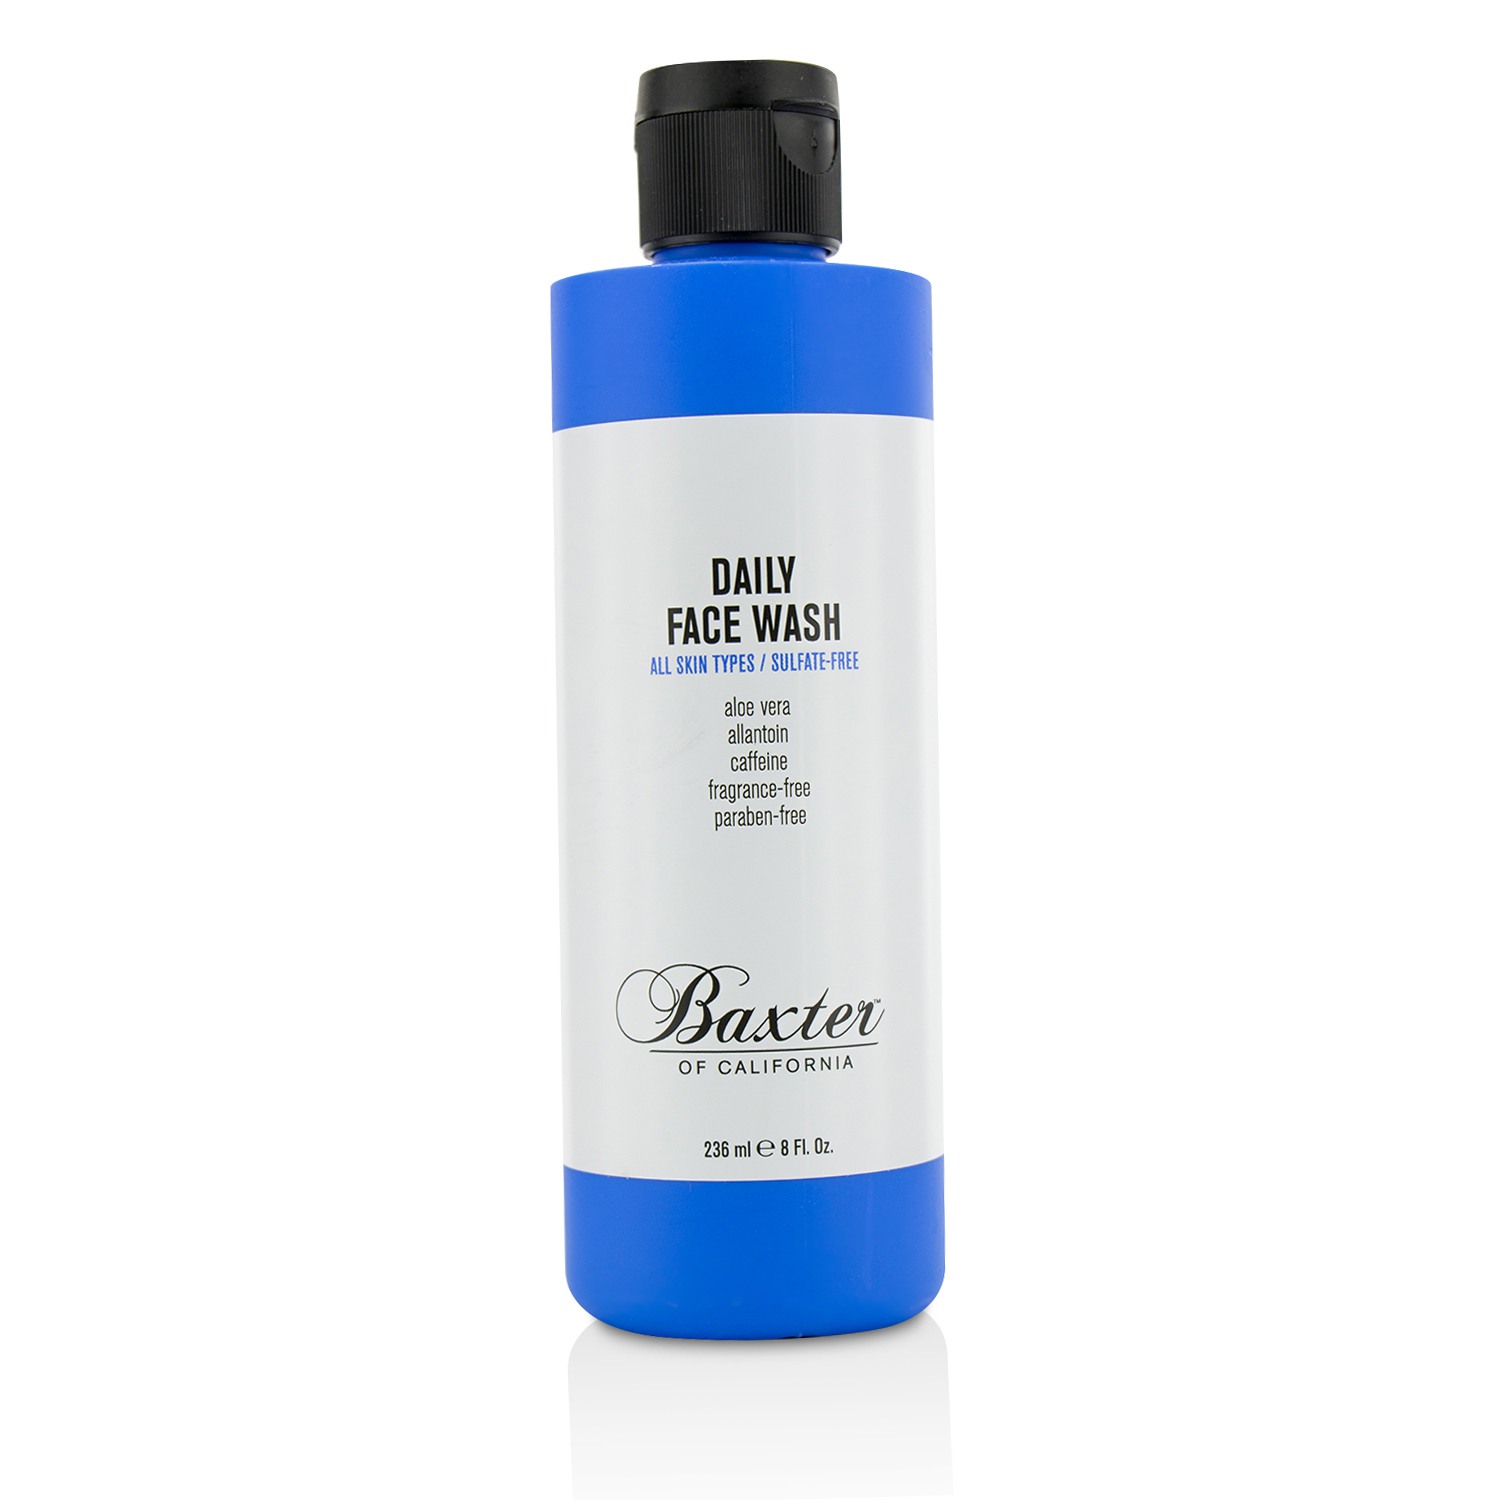 Daily Face Wash (Sulfate-Free) Baxter Of California Image